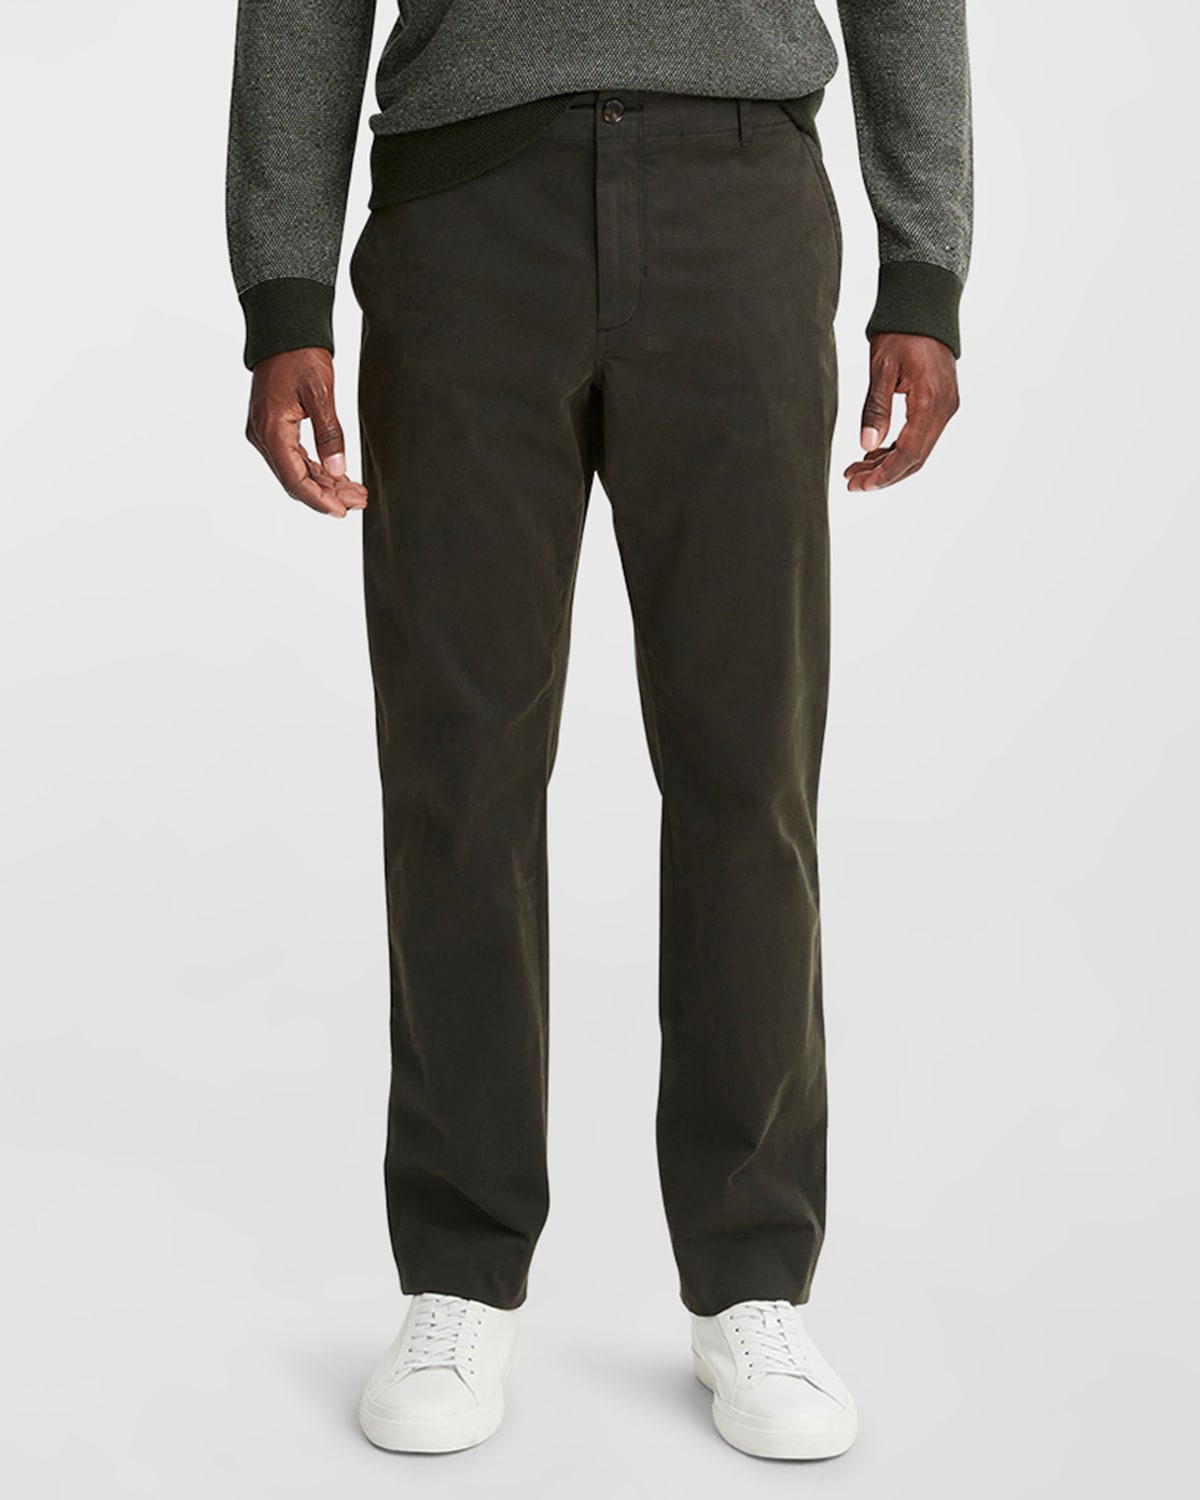 VINCE MEN'S SUEDED TWILL GARMENT-DYED PANTS